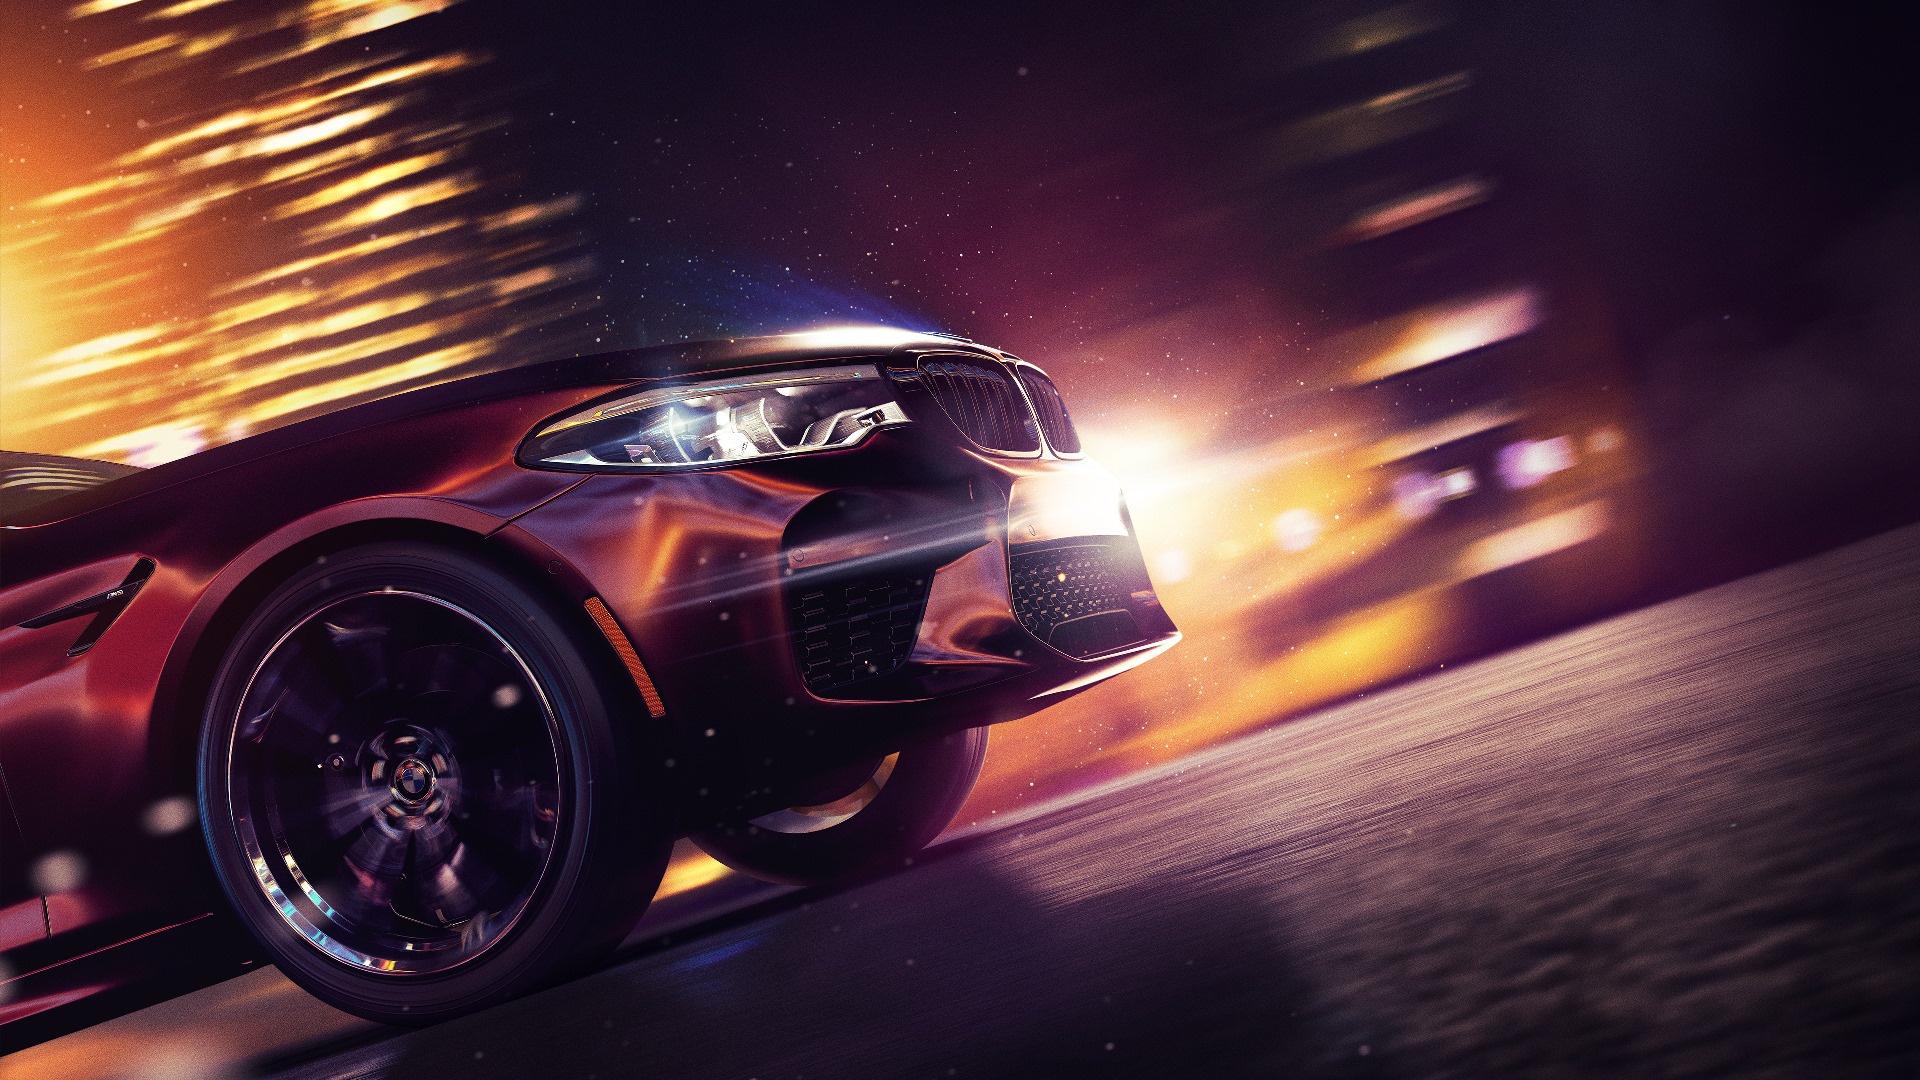 video games, Car, Vehicle, Need for Speed, BMW M5, Need for Speed: Payback Wallpaper